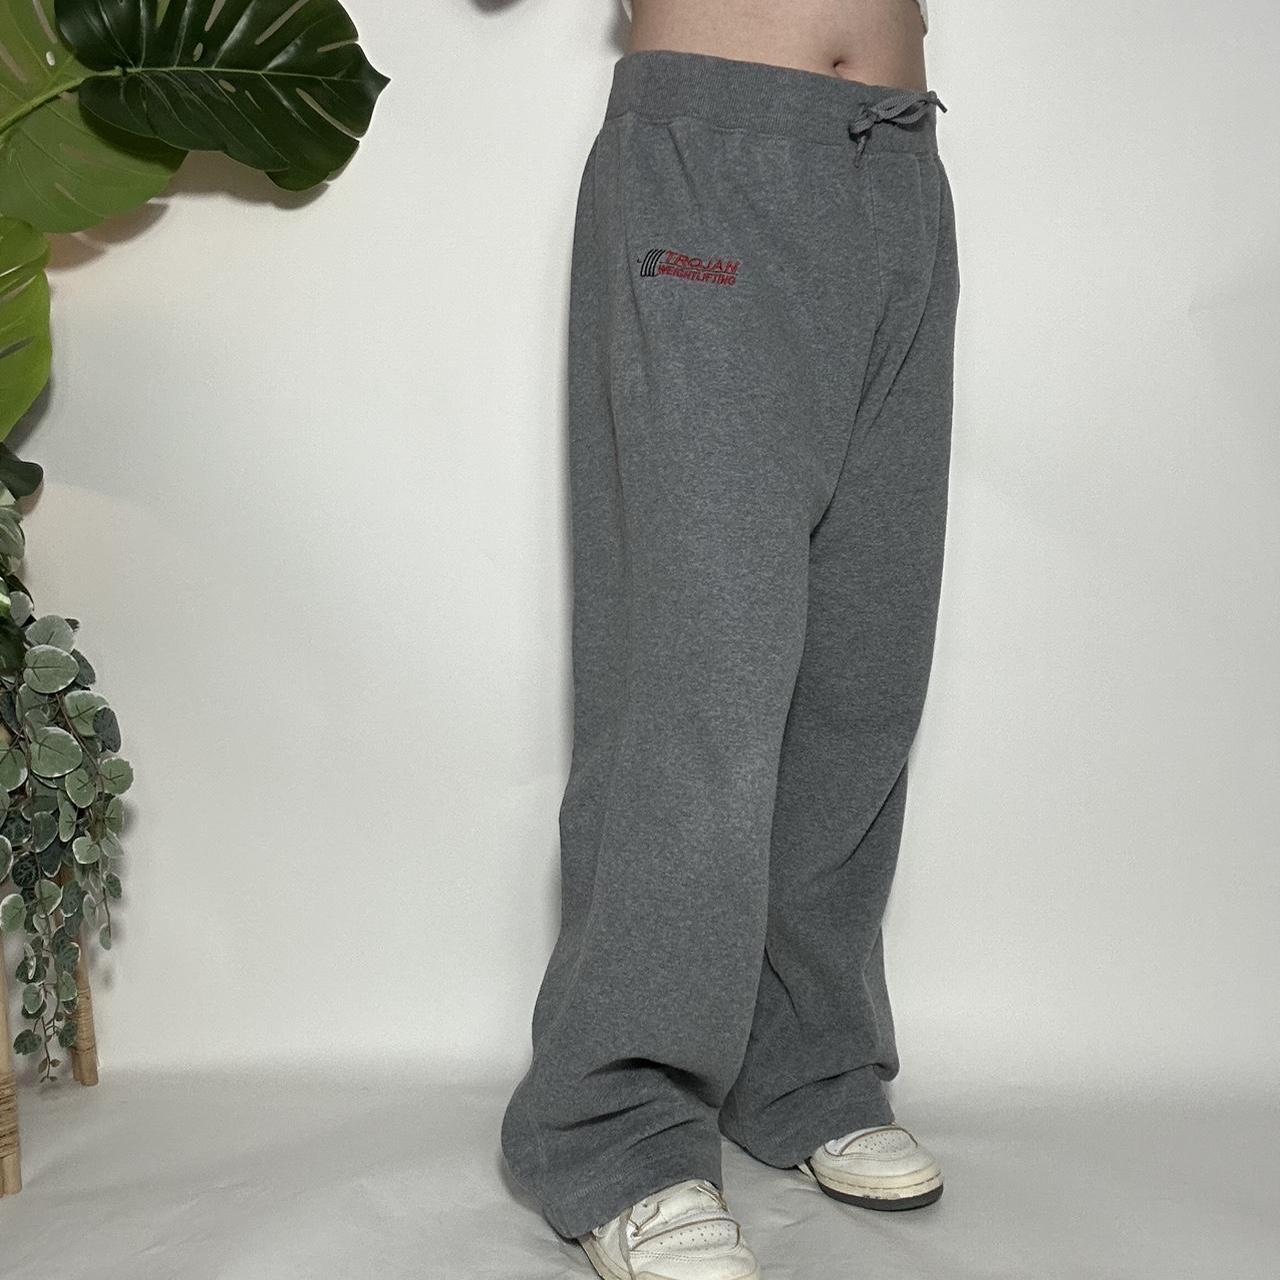 90s/early 2000s nike track pants with zip up ankles - Depop